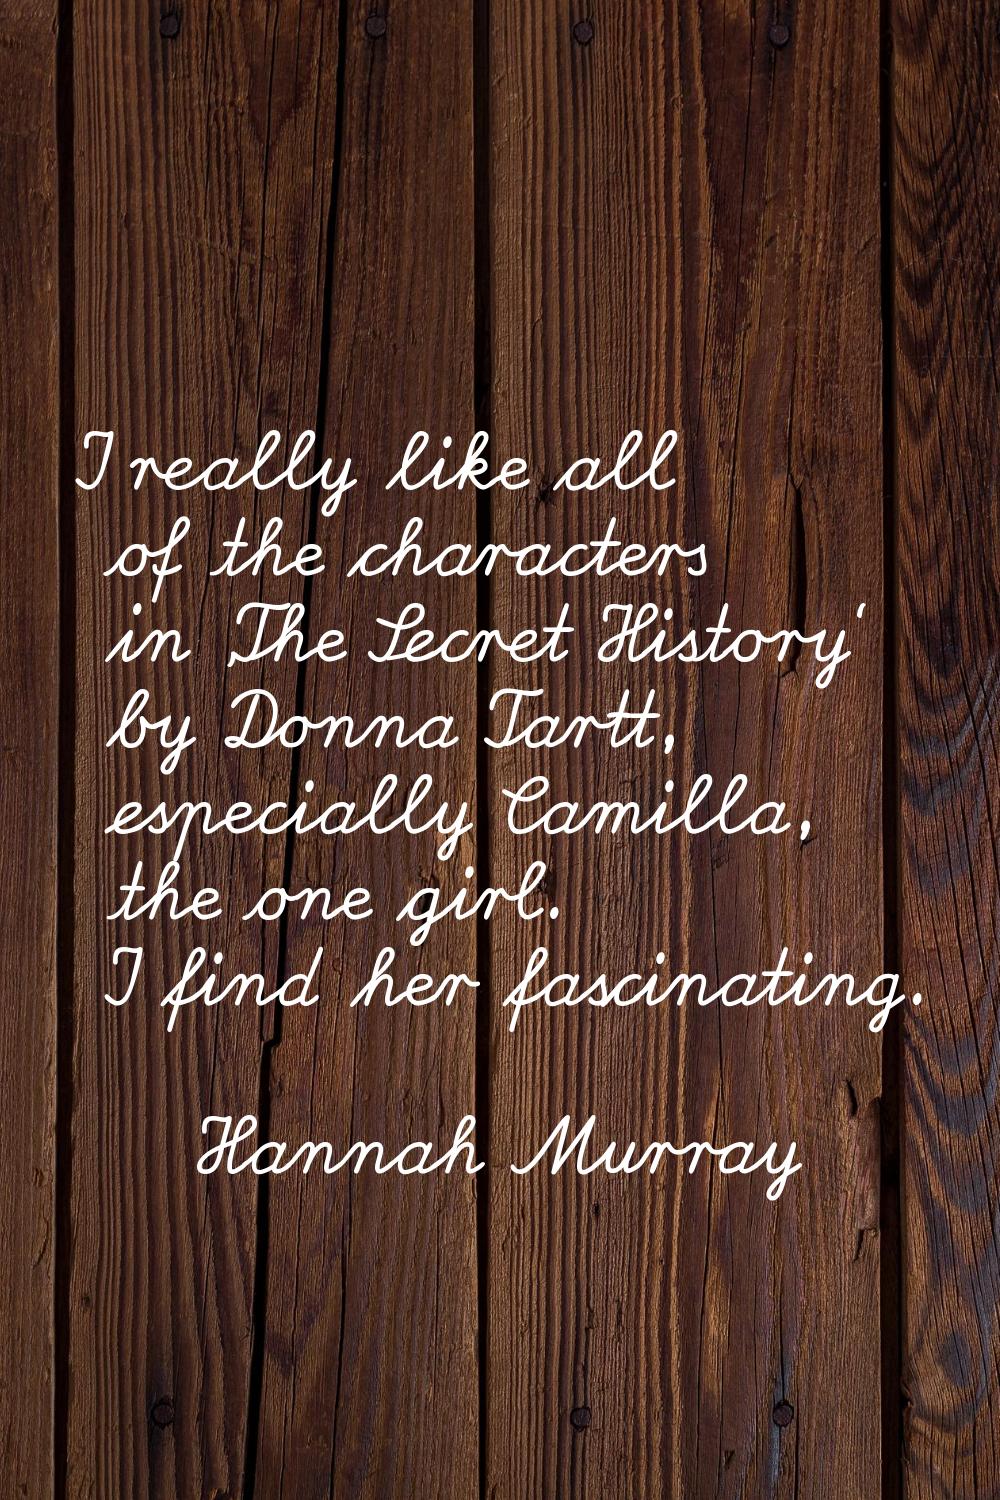 I really like all of the characters in 'The Secret History' by Donna Tartt, especially Camilla, the